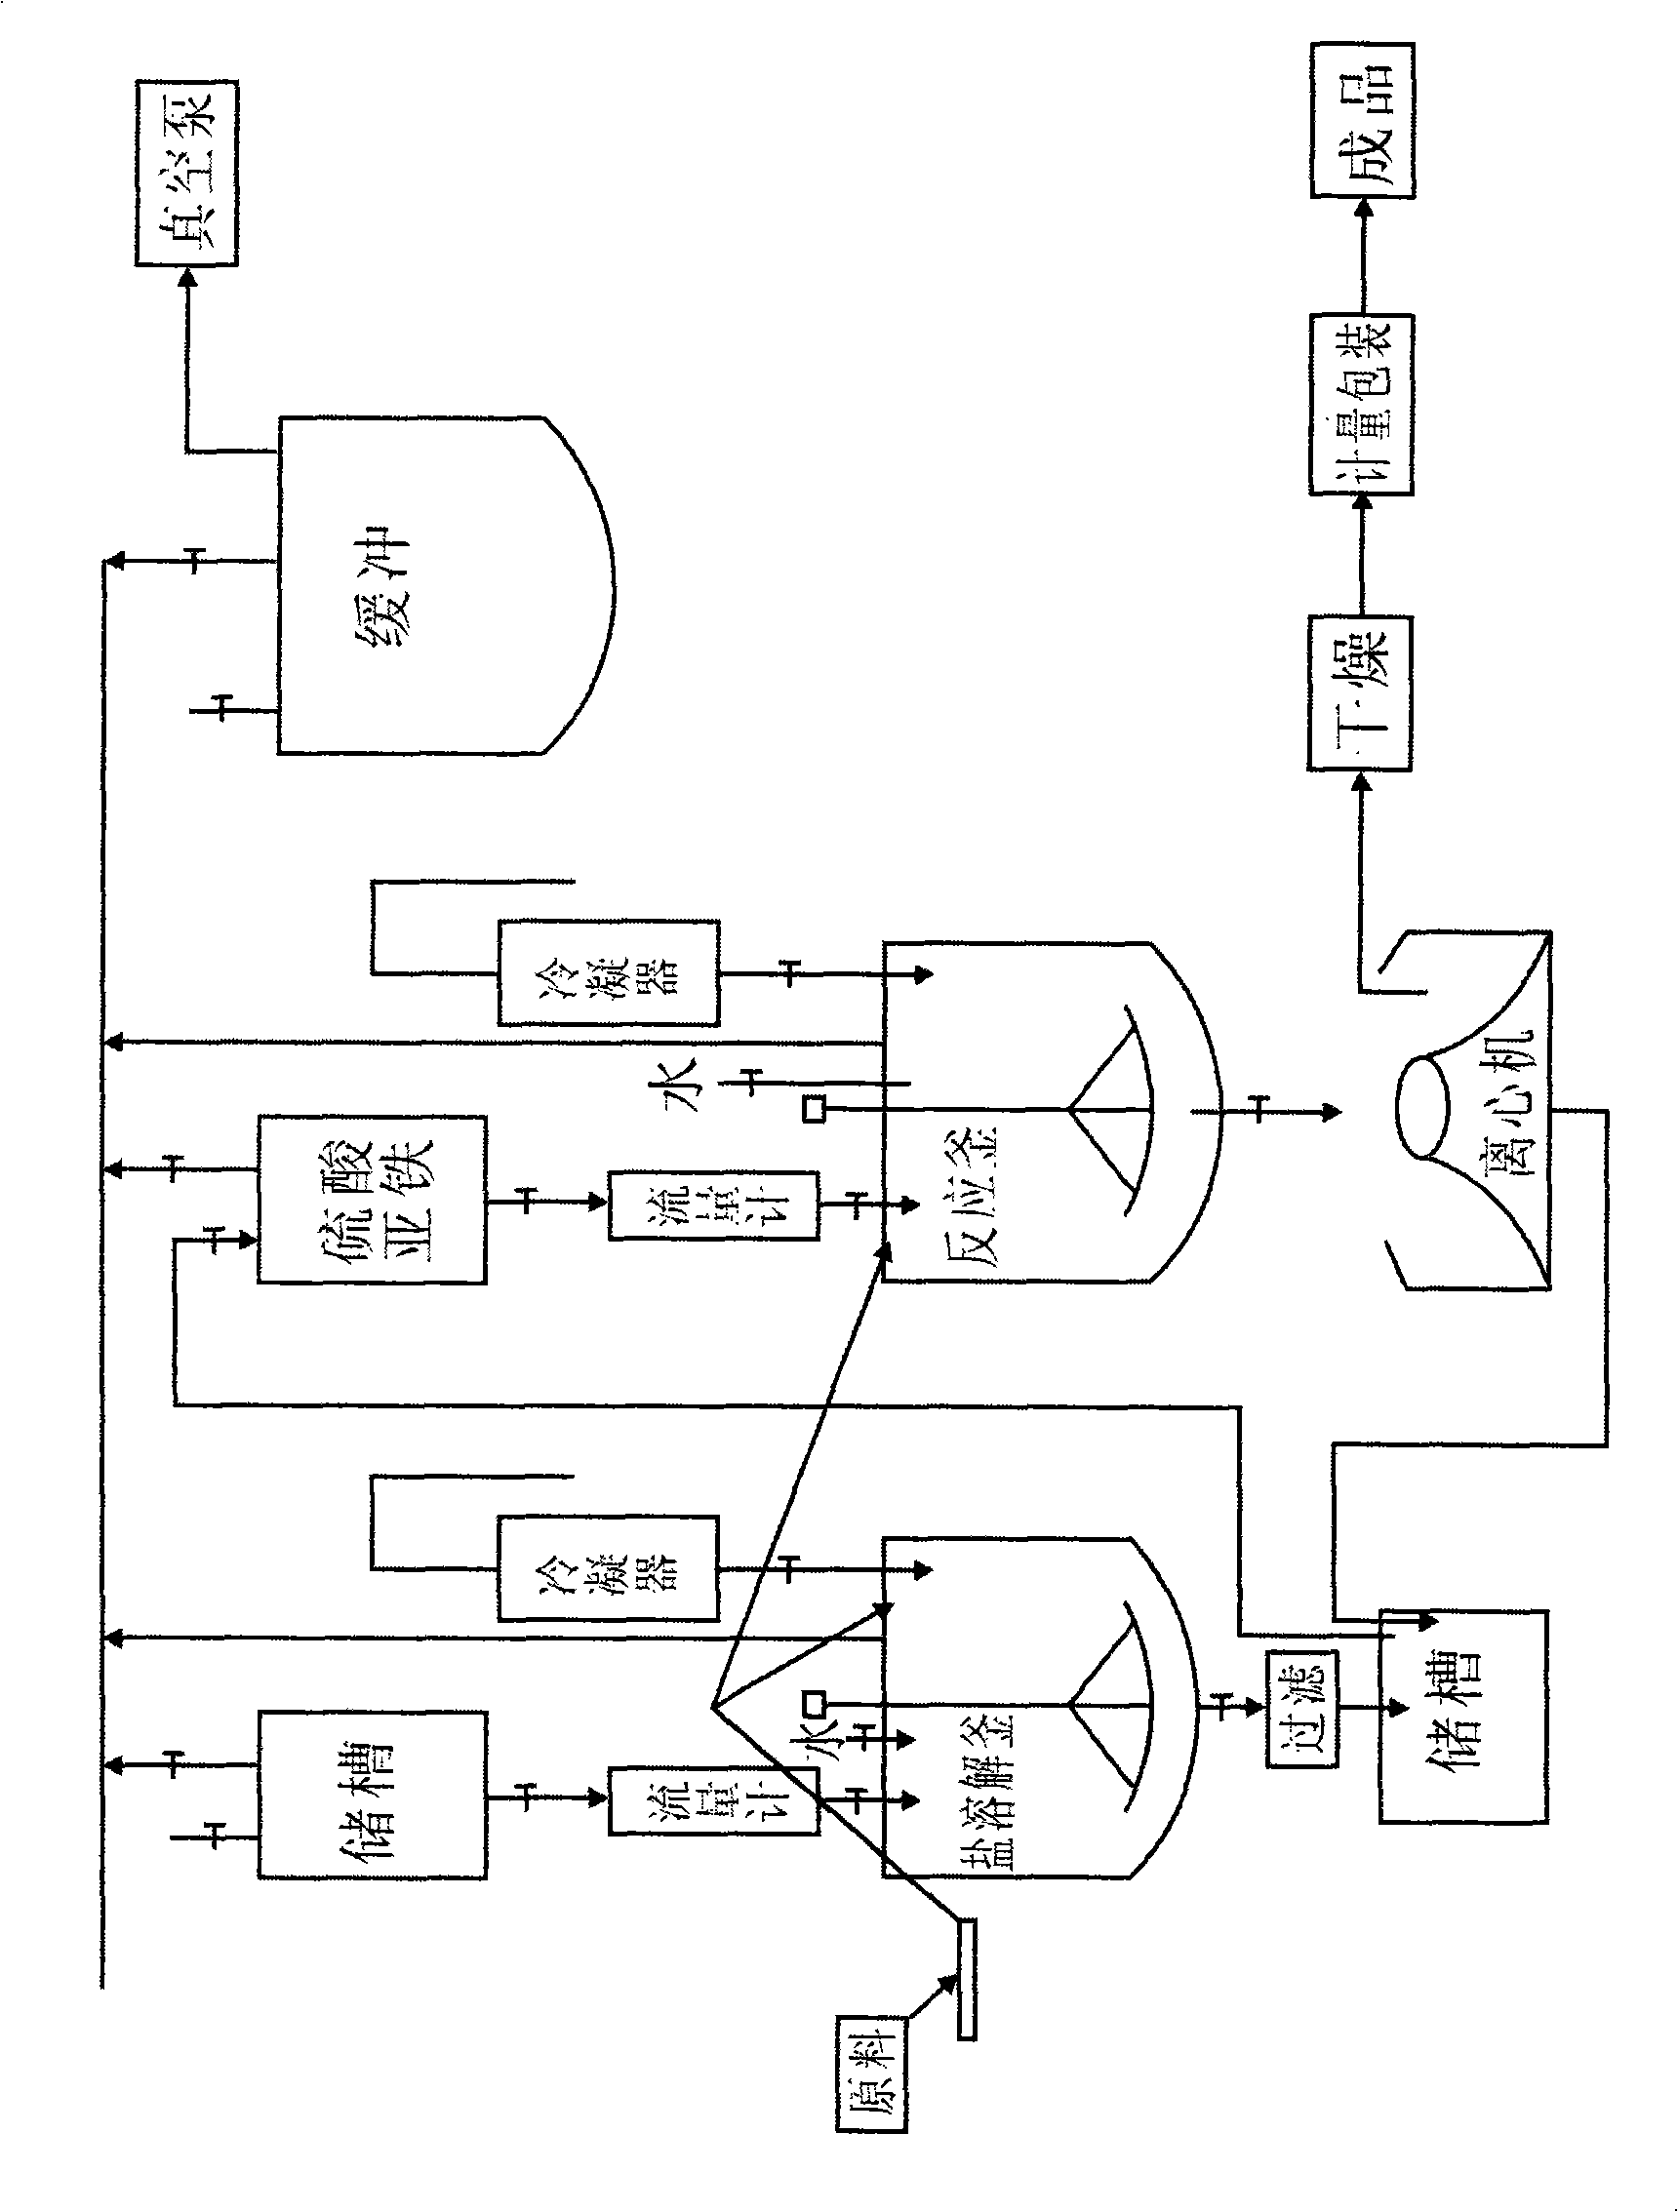 Process for producing ferrous fumarate